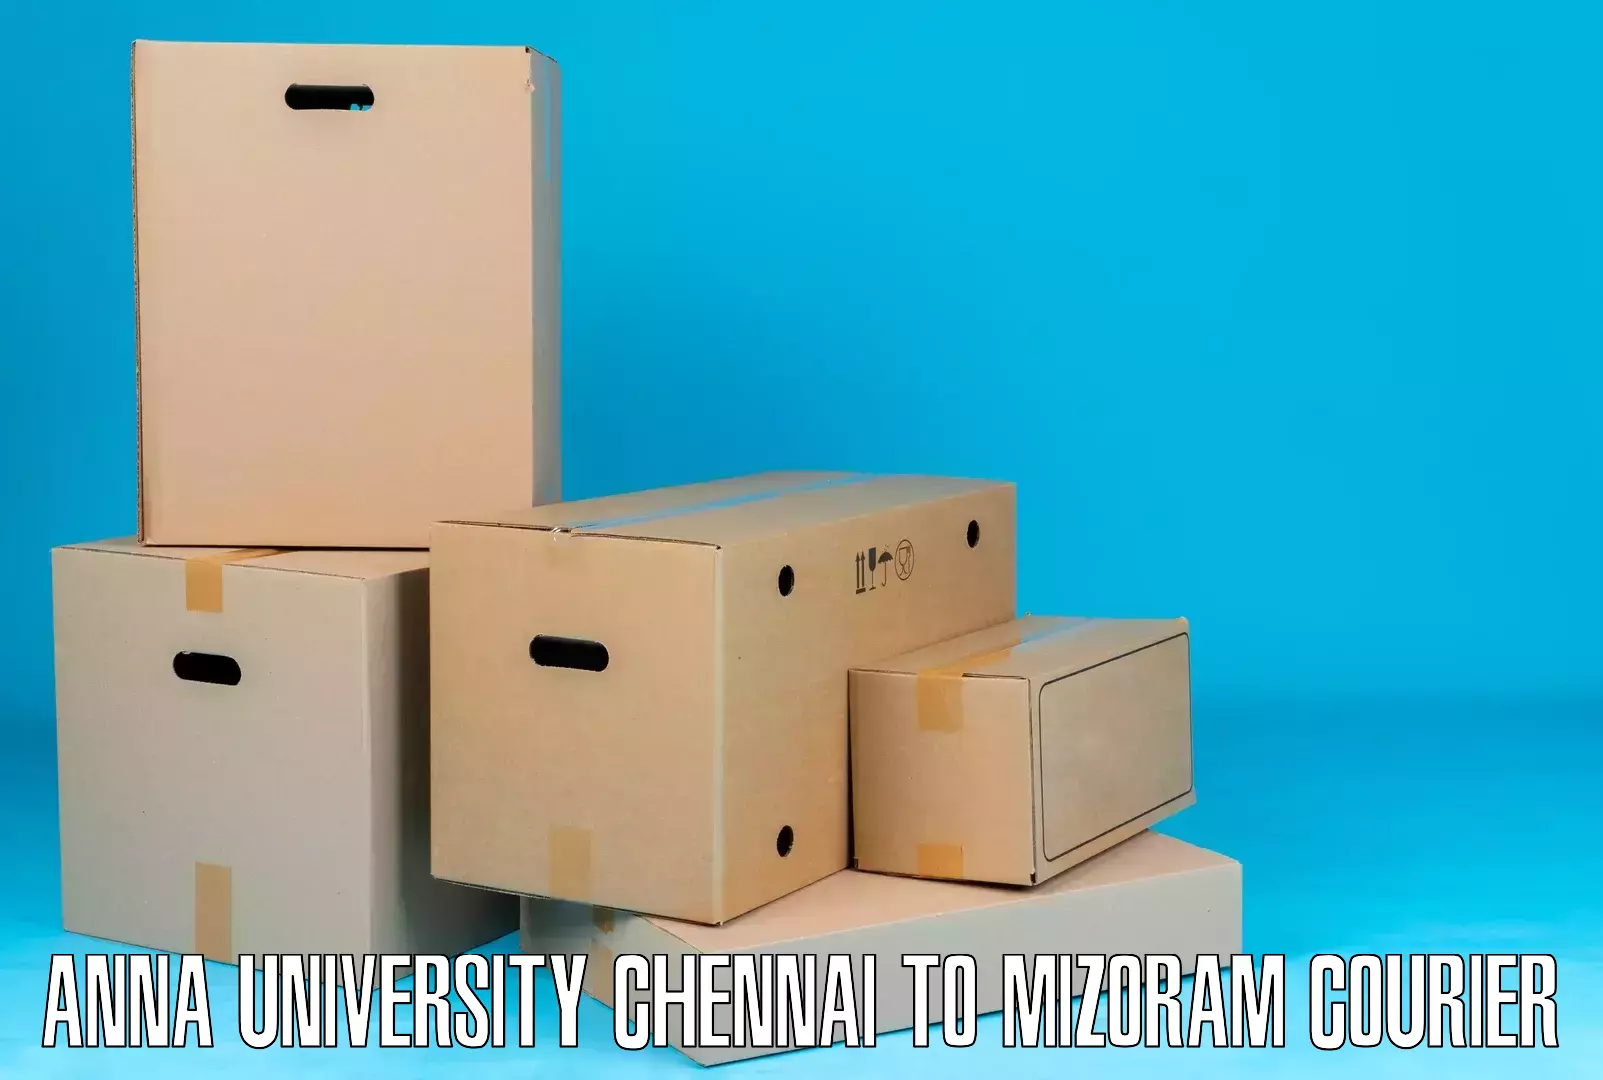 Express package services Anna University Chennai to Siaha